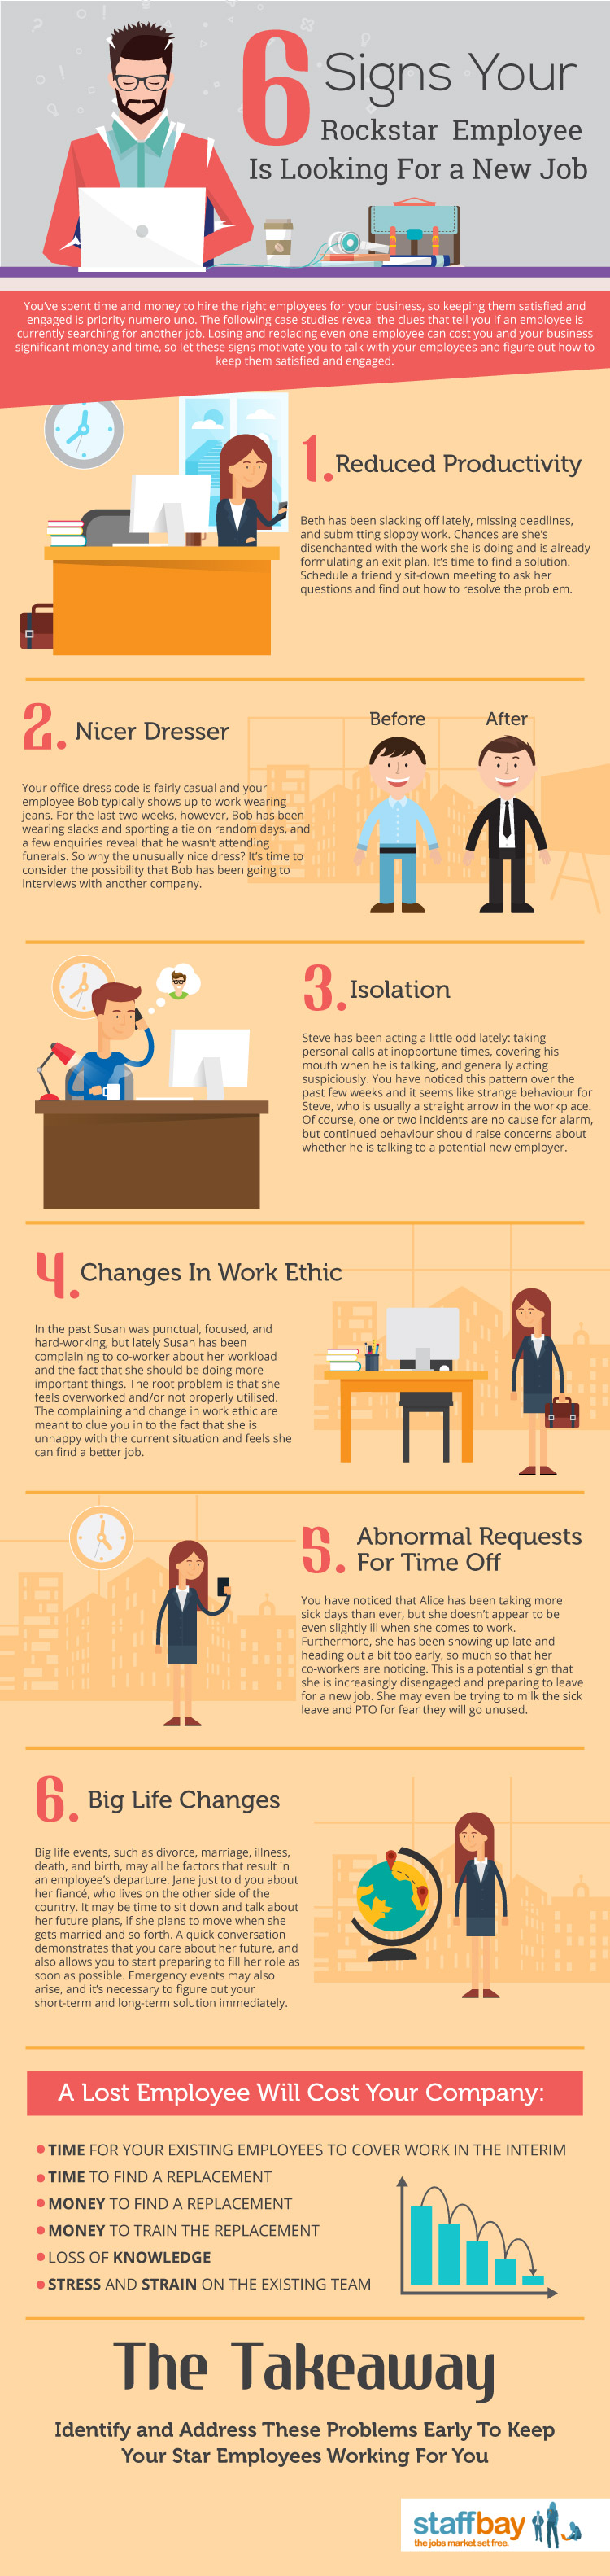 6 signs your rockstar employee is looking for a new job